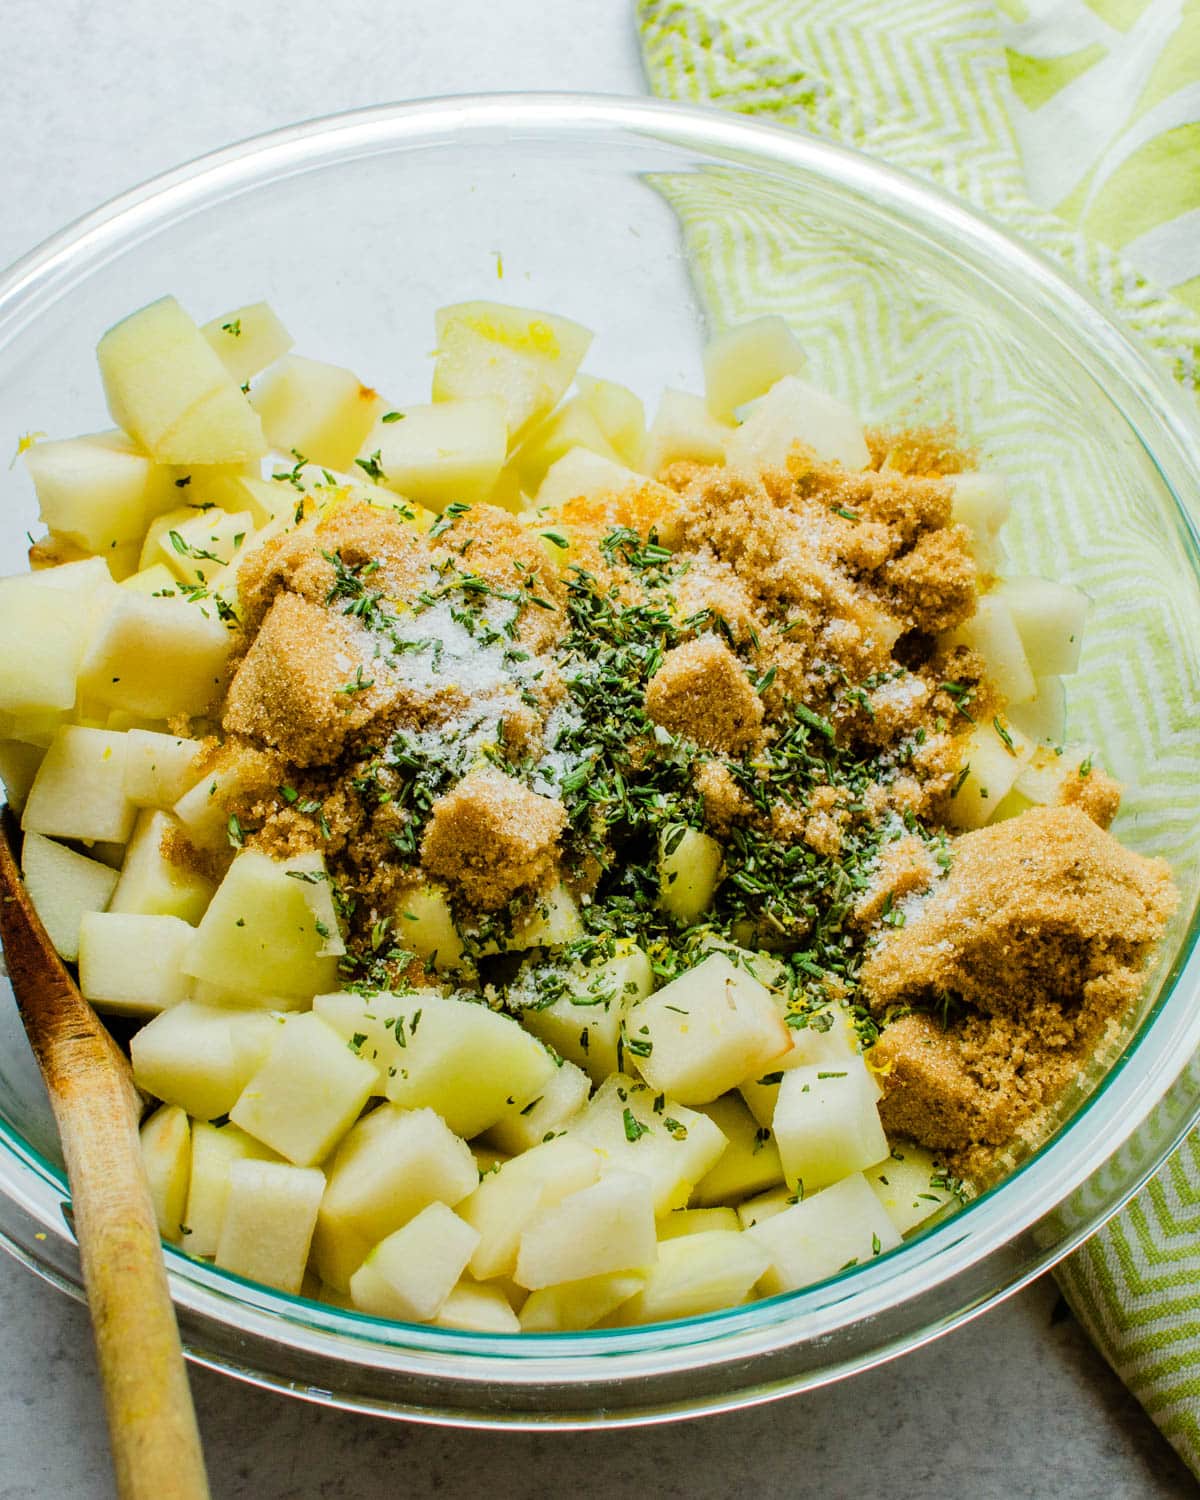 I am combining diced pears with fresh herbs and brown sugar.